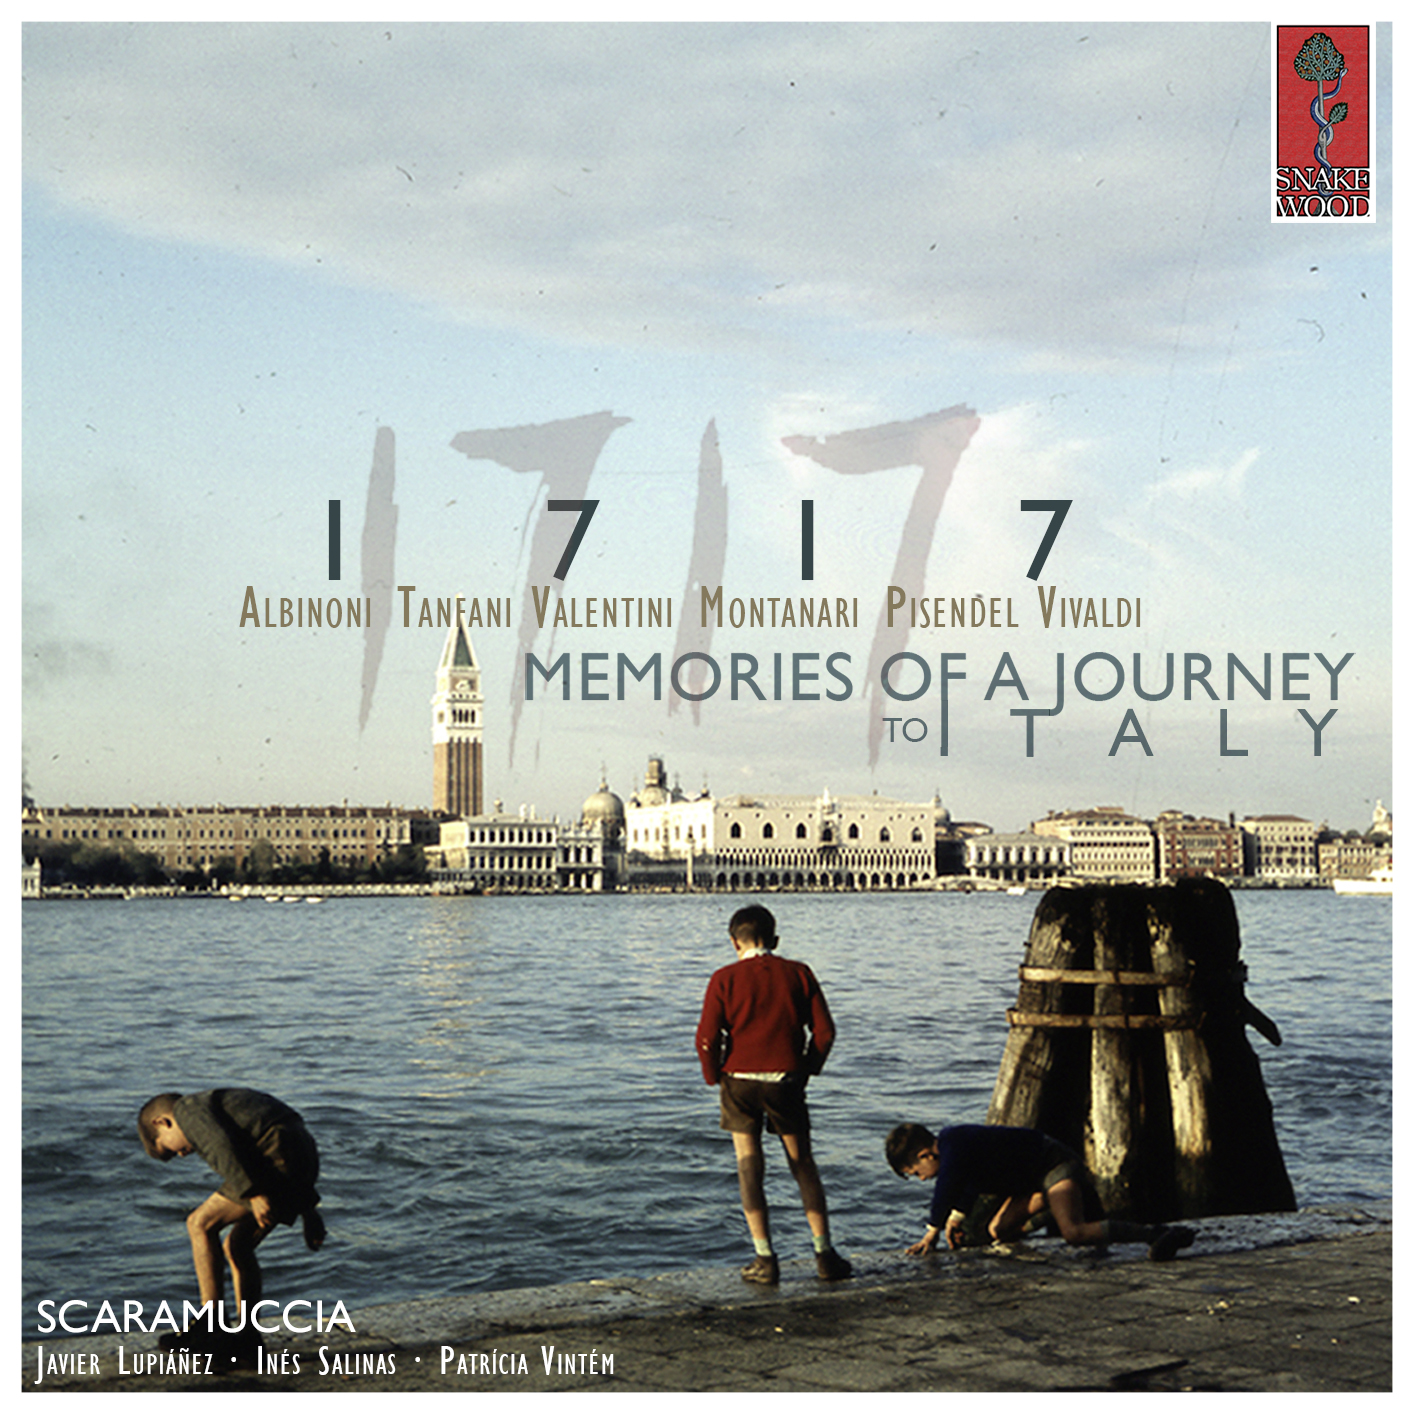 Scaramuccia – 1717: Memories of a Journey to Italy (2018/2021) [FLAC 24bit/96kHz]